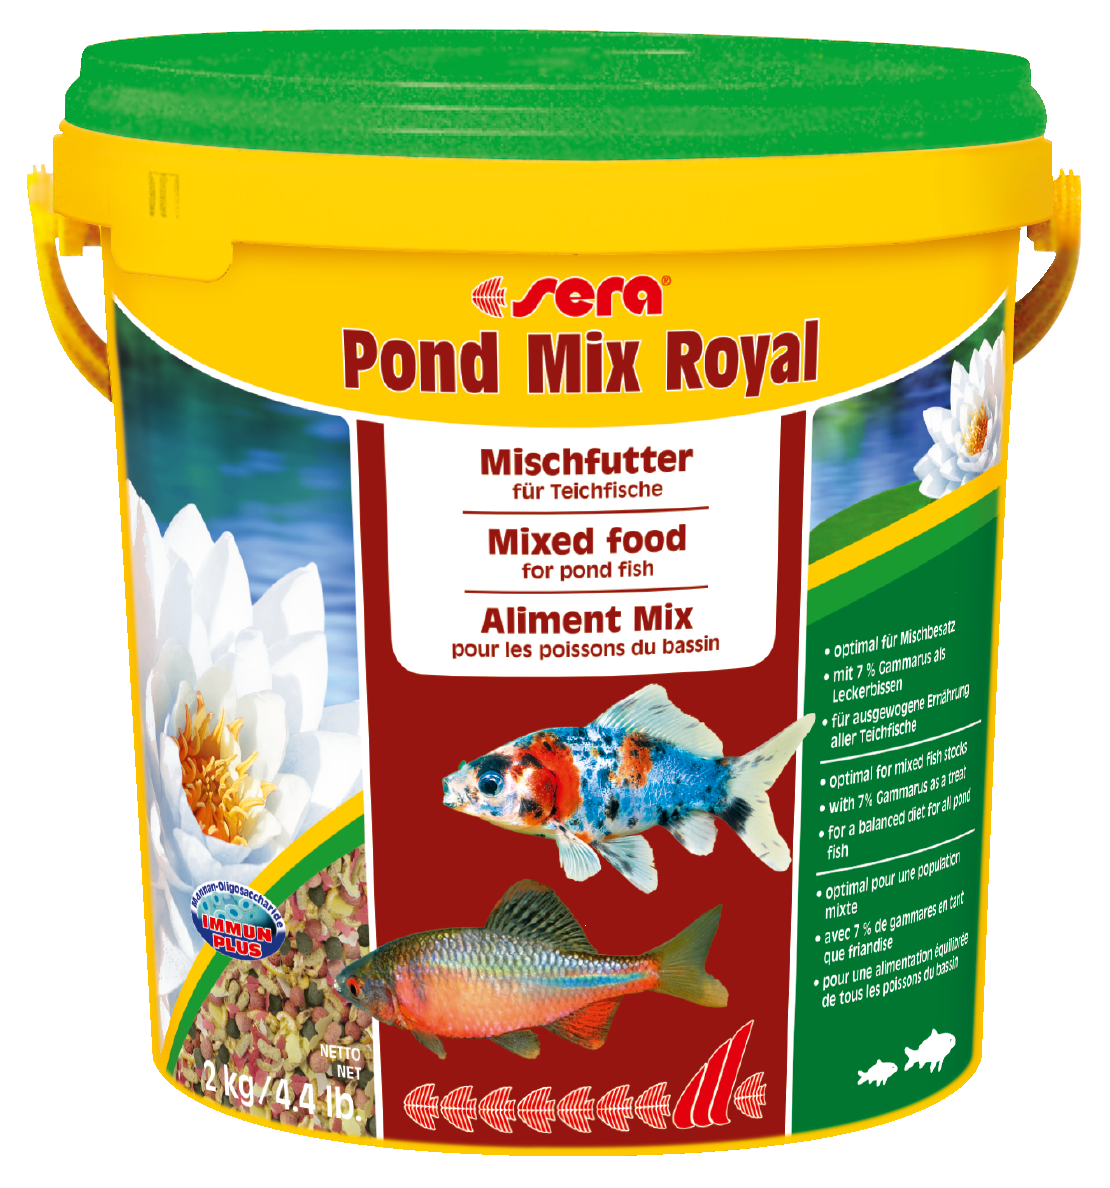 Fischmischfutter "Pond" Mix Royal 2 kg + product picture